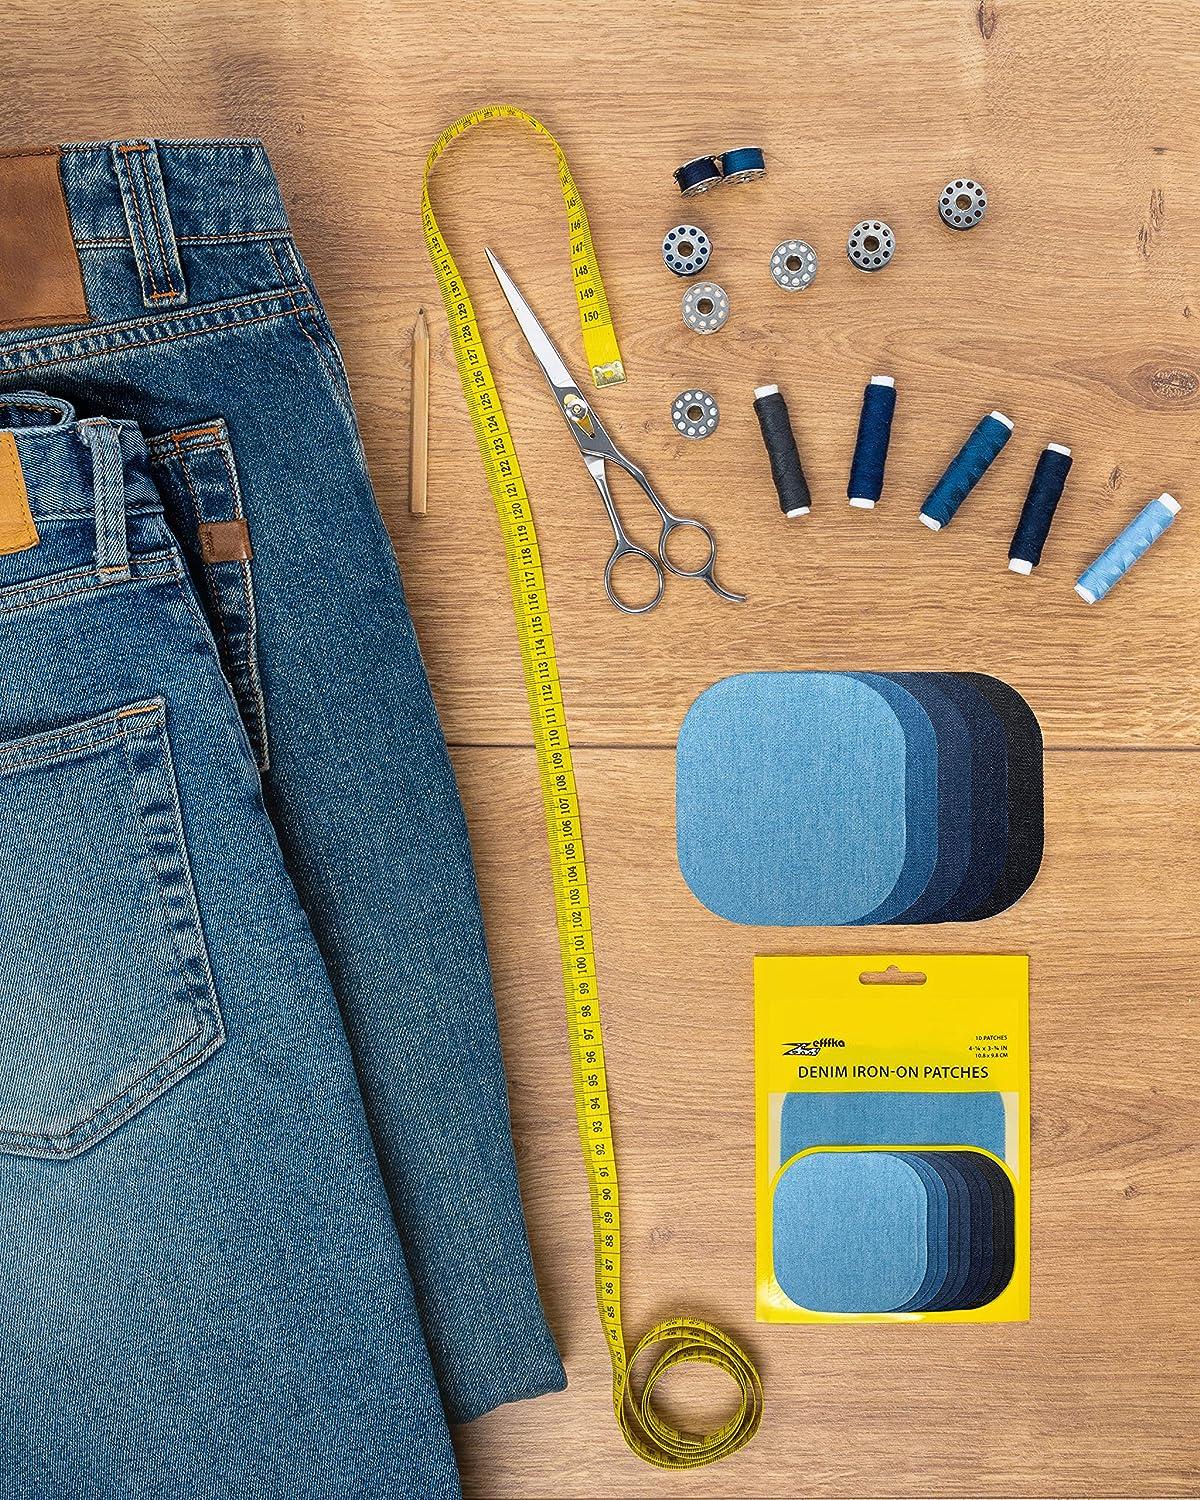 ZEFFFKA Premium Quality Denim Iron-on Jean Patches Inside & Outside  Strongest Glue 100% Cotton Assorted Shades of Blue Black Repair Decorating  Kit 10 Pieces Size 4-1/4 by 3-3/4 (9.8 cm x 10.8 cm)